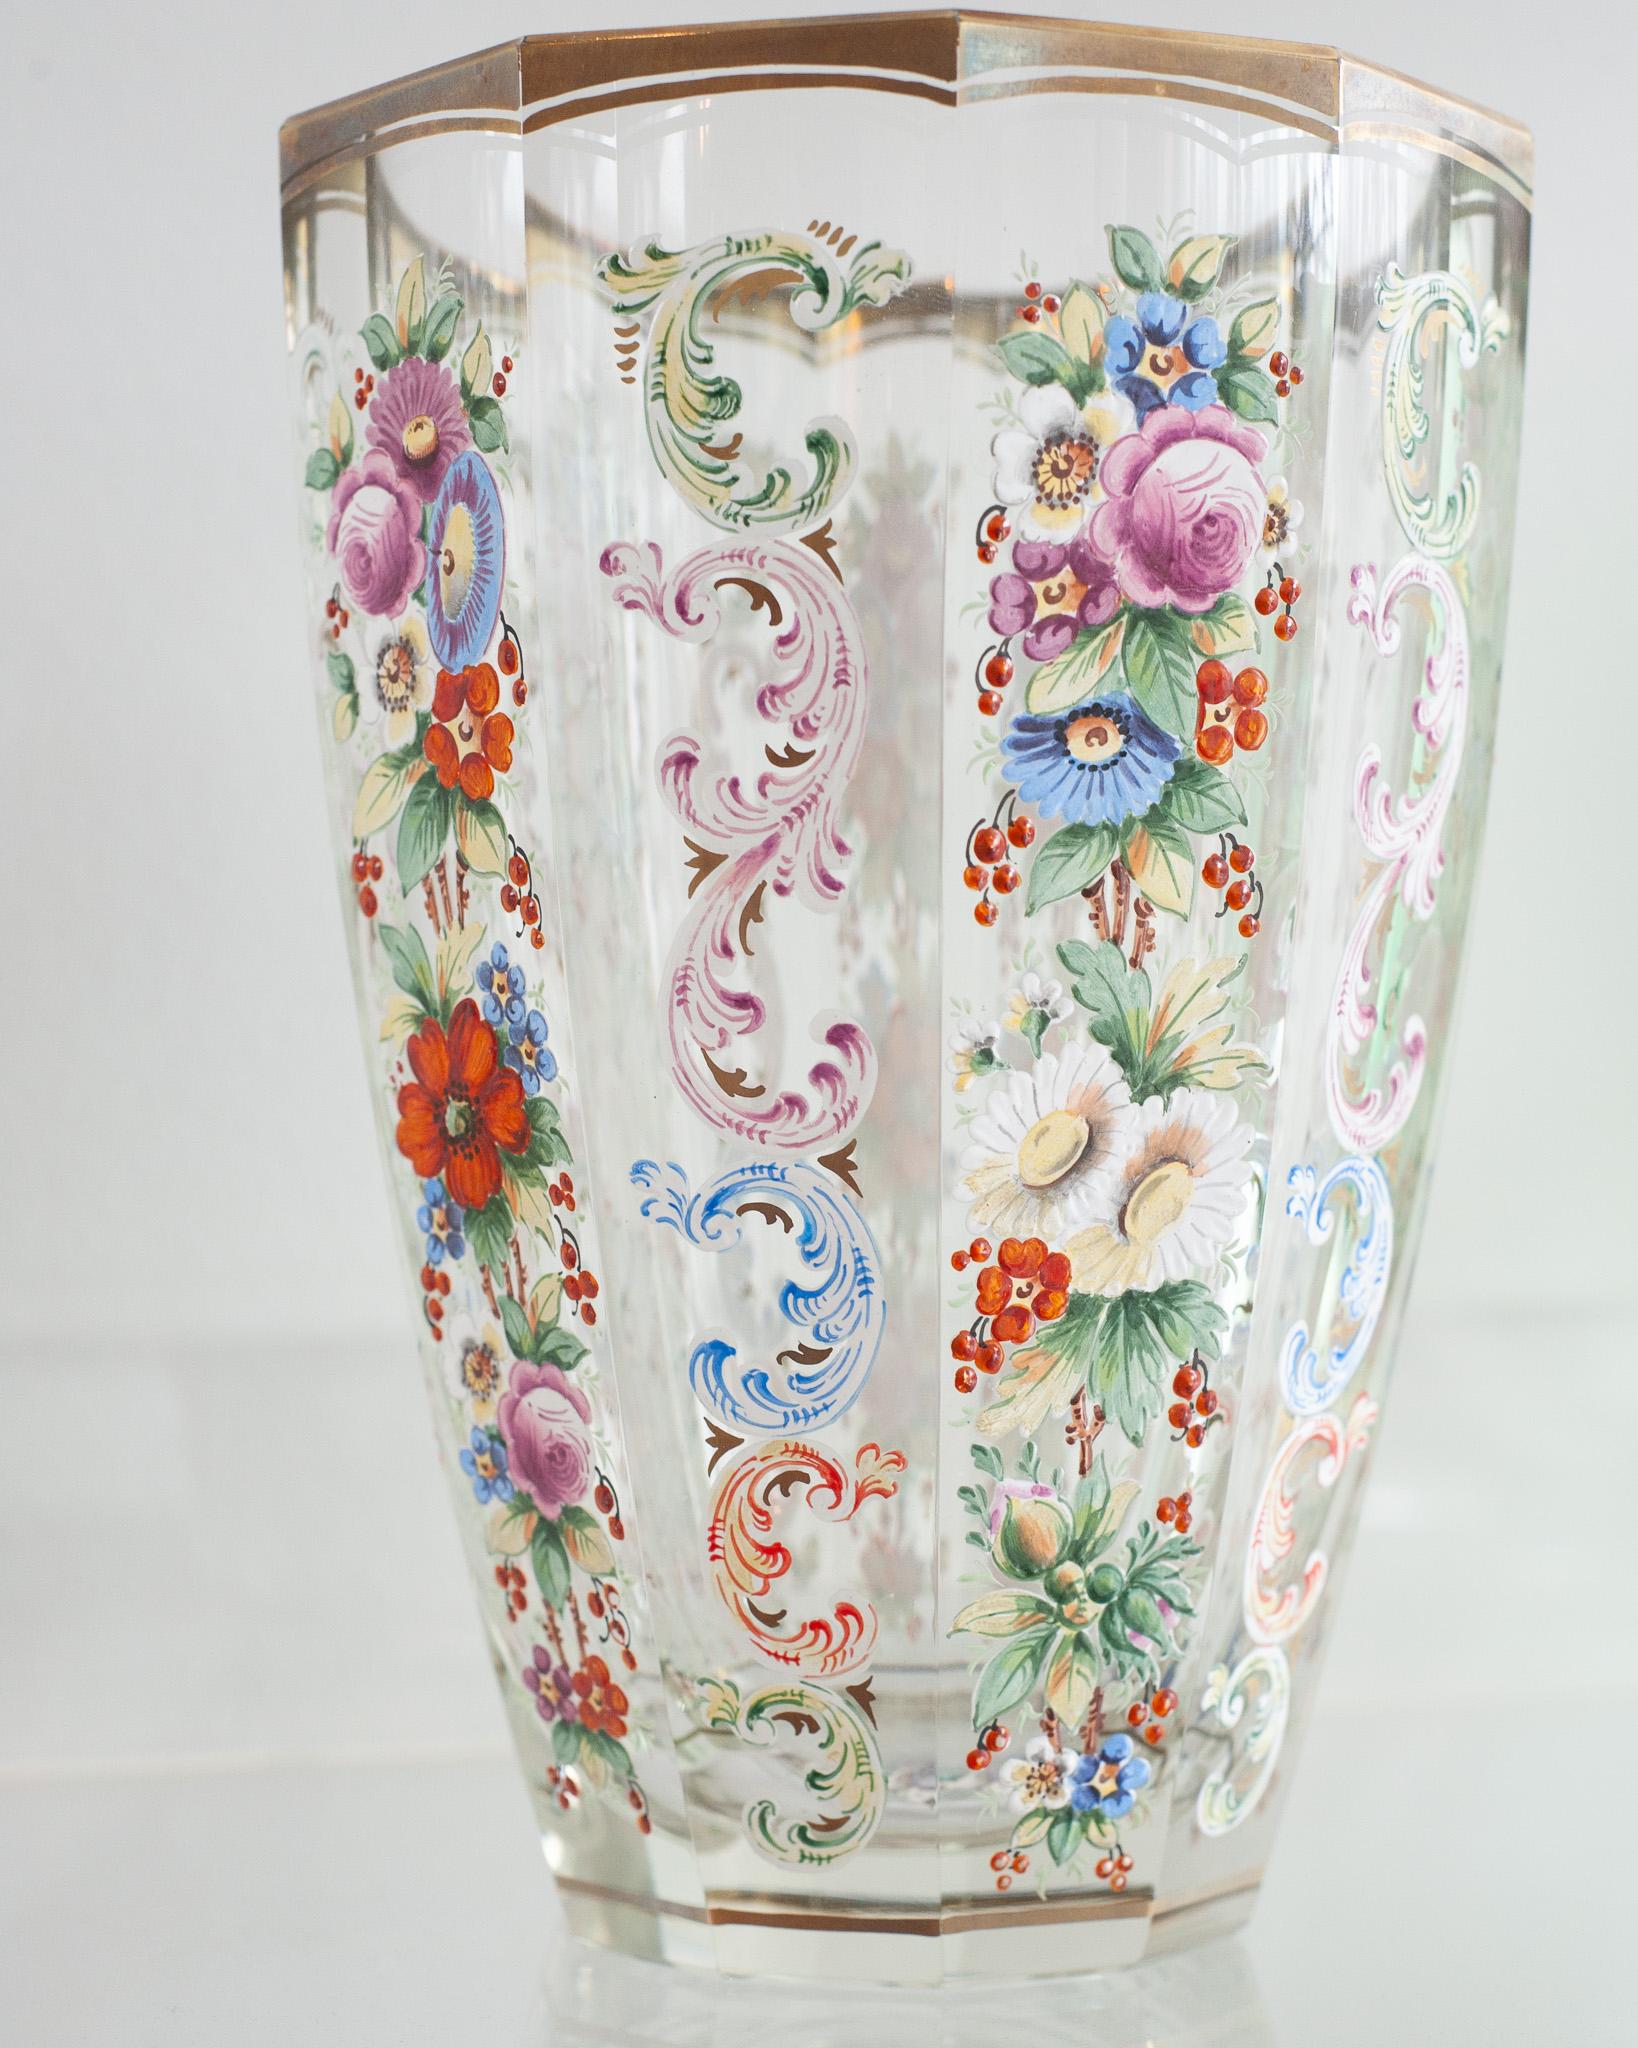 This antique Moser vase from 1900-1920 is just as beautiful as any bouquet of flowers that it could hold. The hand painting on this vase is of an exceptional quality. Sometimes even a small piece can have a grand impact.